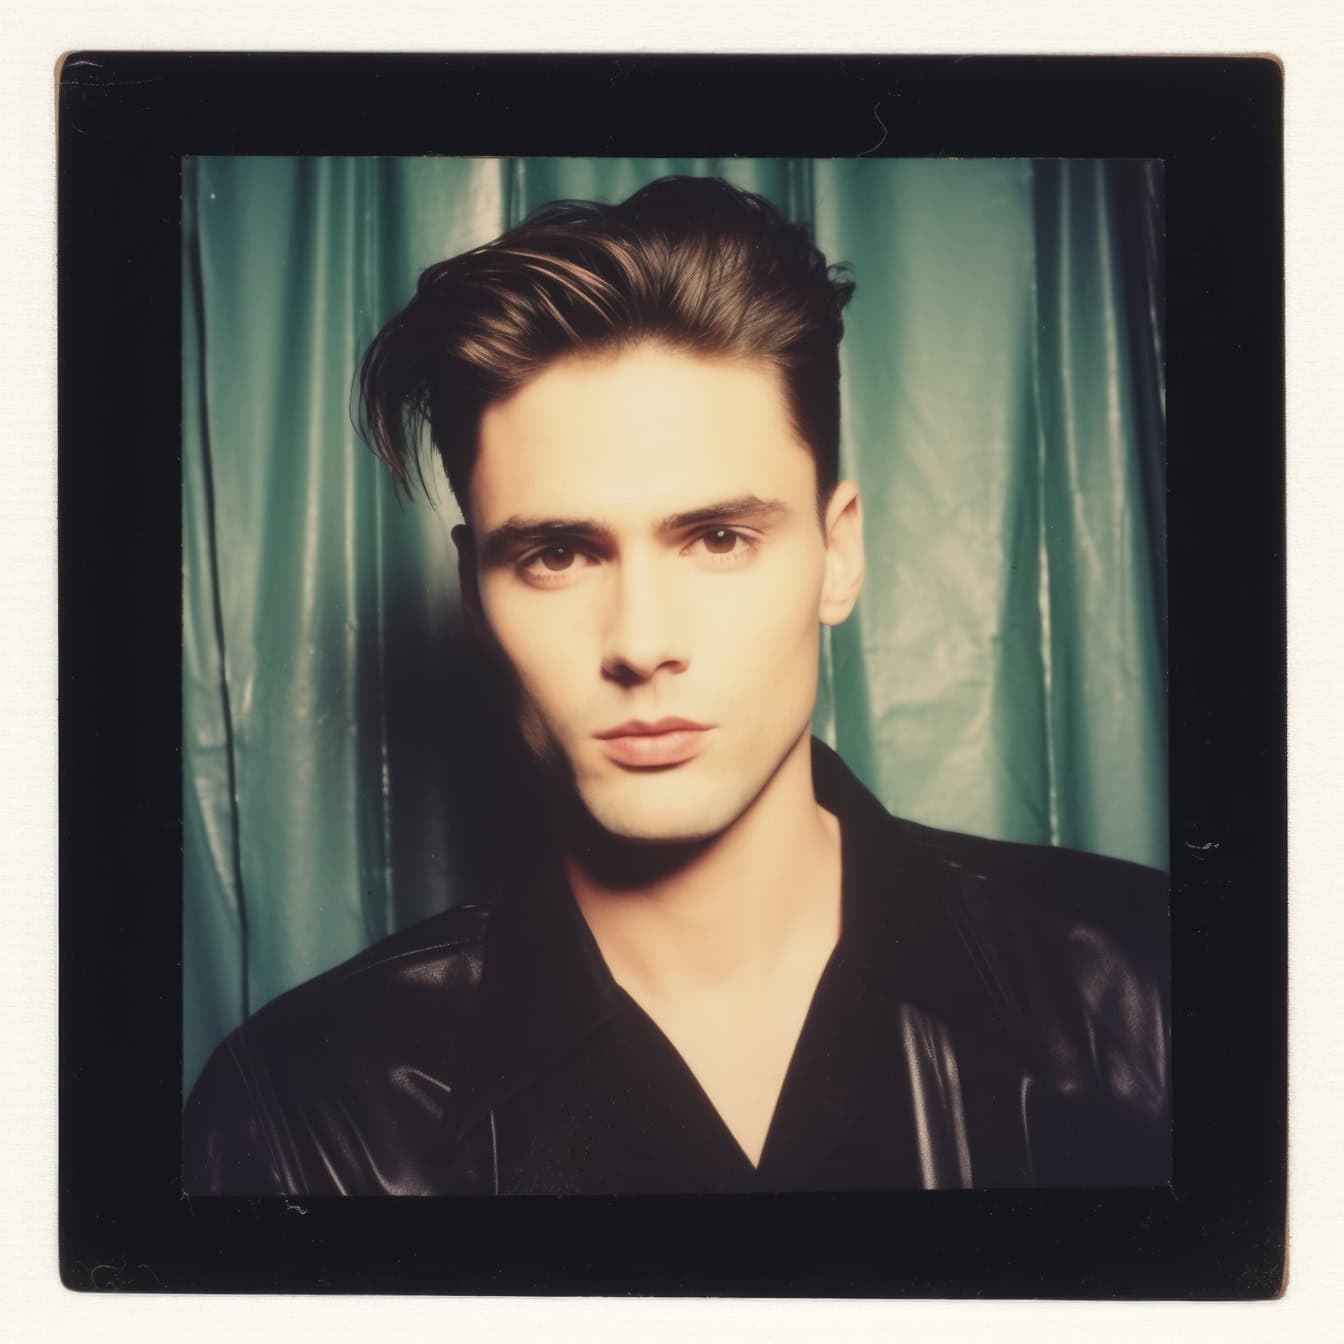 Faded polaroid photo of a handsome man in black leather jacket posing for a picture